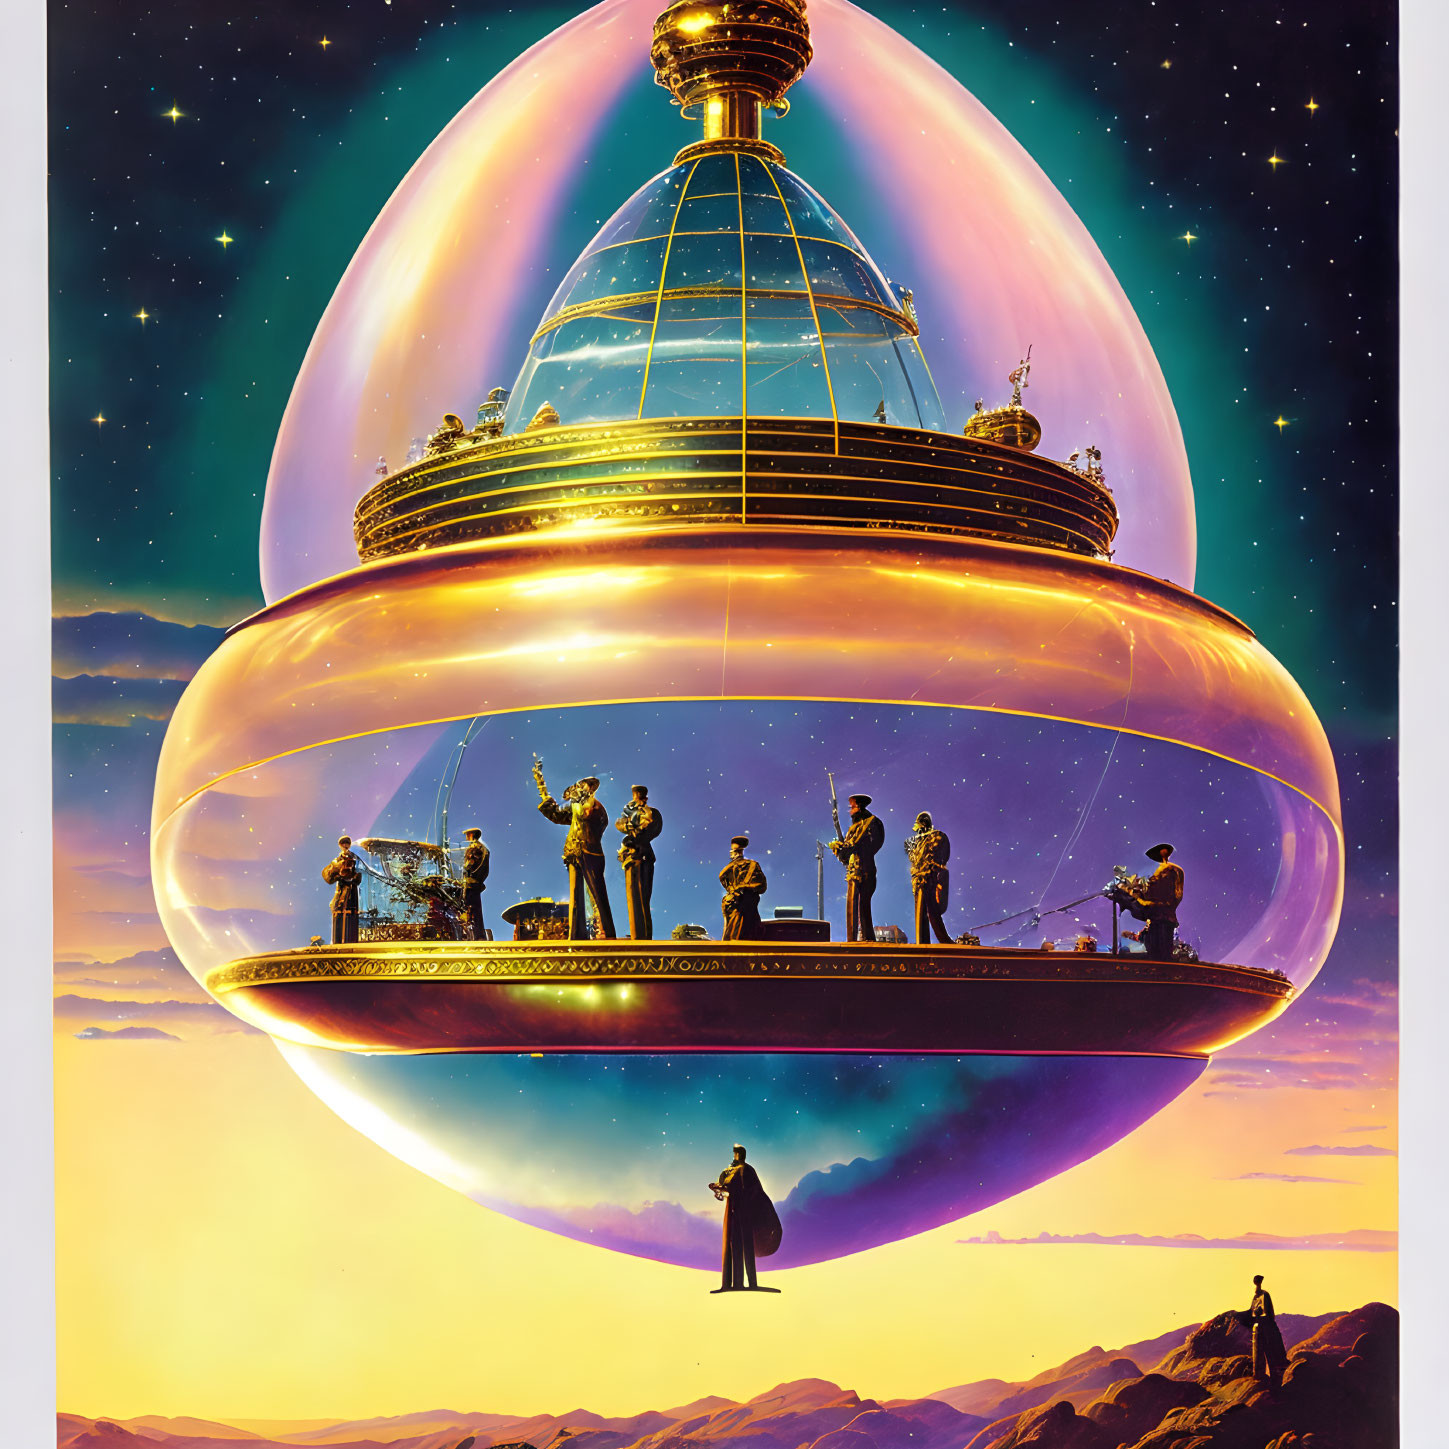 Futuristic floating structure with dome and silhouettes of people and musical instruments at twilight